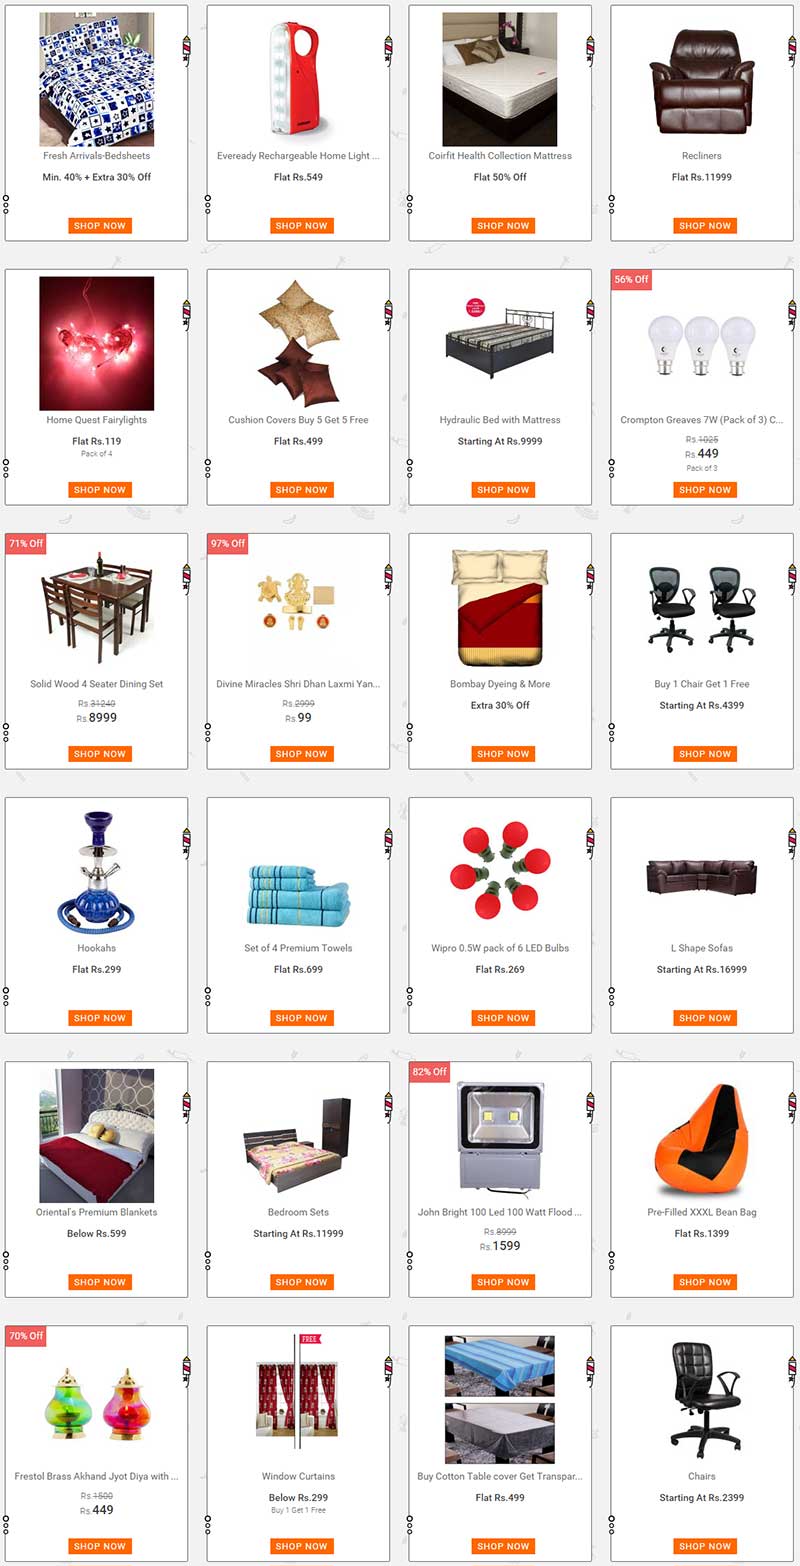 snapdeal-diwali-sale-home-decor-bedsheets-2015-offers-deals